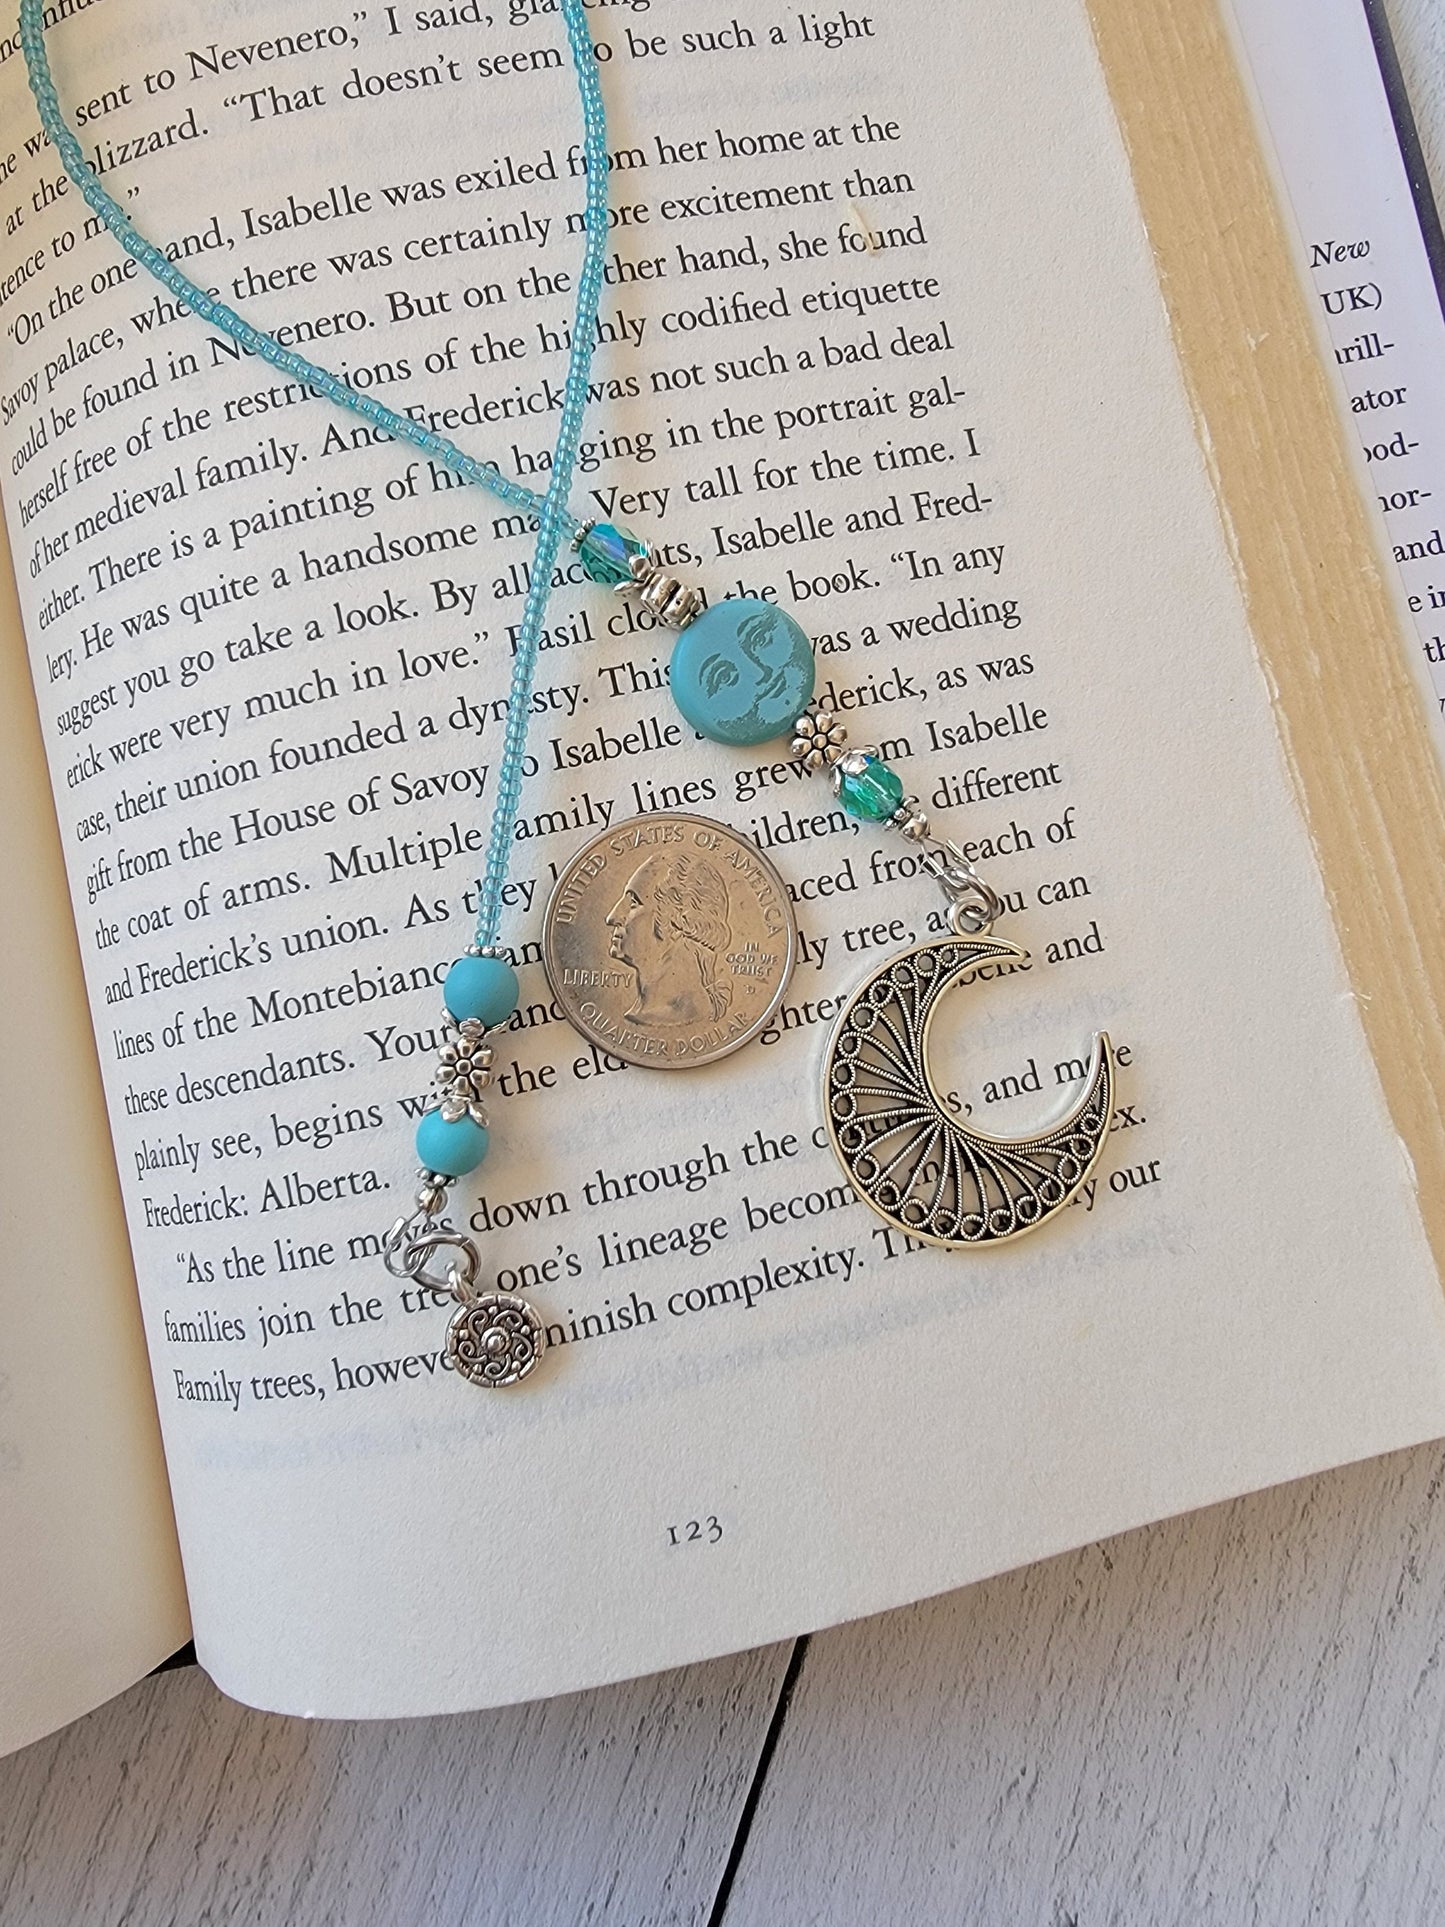 Celestial Moon Beaded Bookmark with Whimsical Man in the Moon Bead